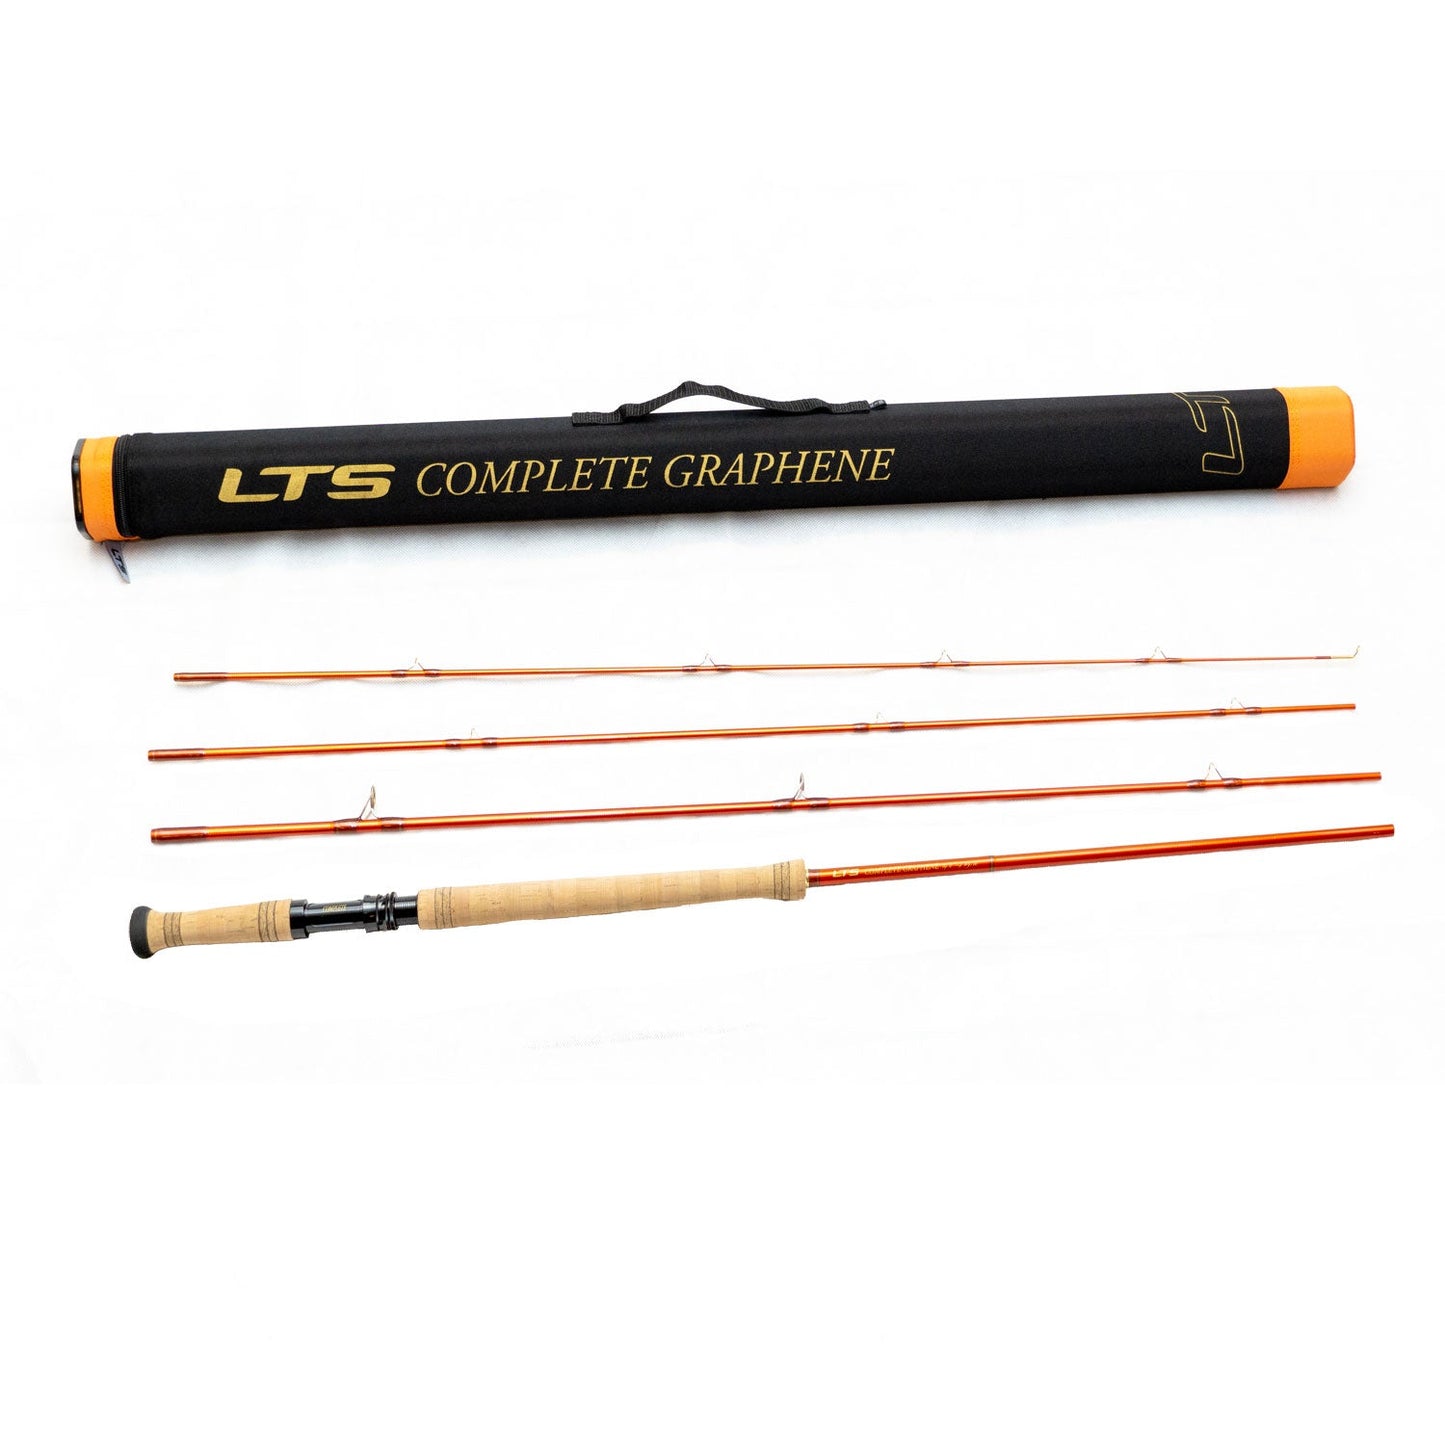 LTS Complete Graphene - Two-handed fly rod - 6-piece – Atlantic